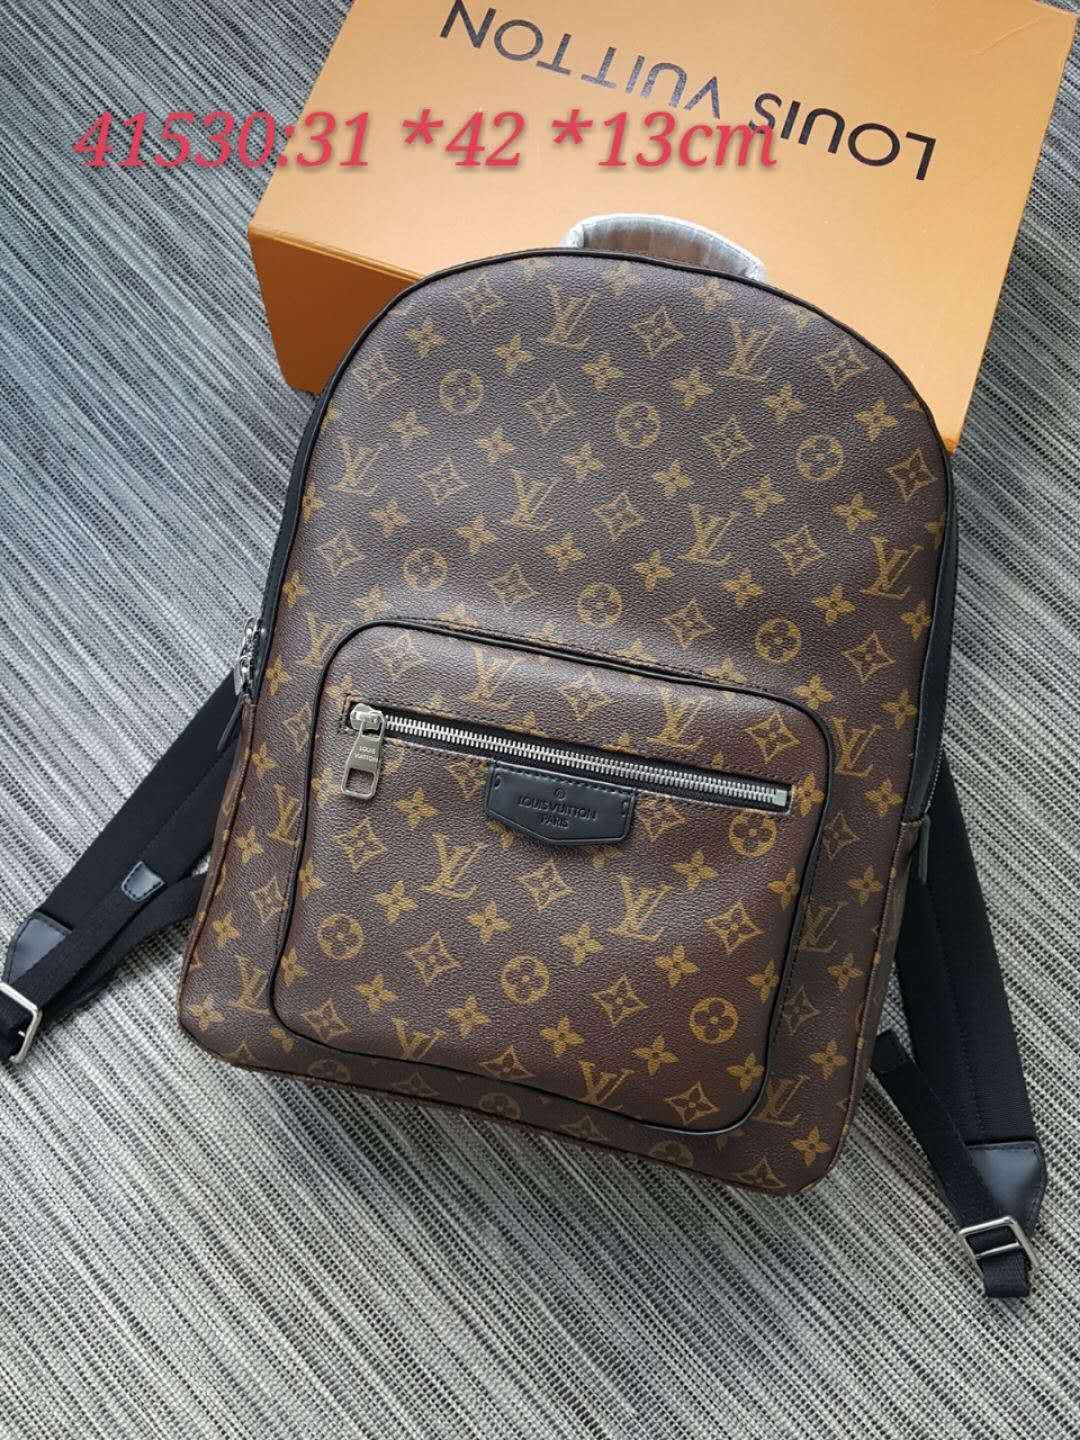 Backpack LV 603 without box Size 31*42*13 cm